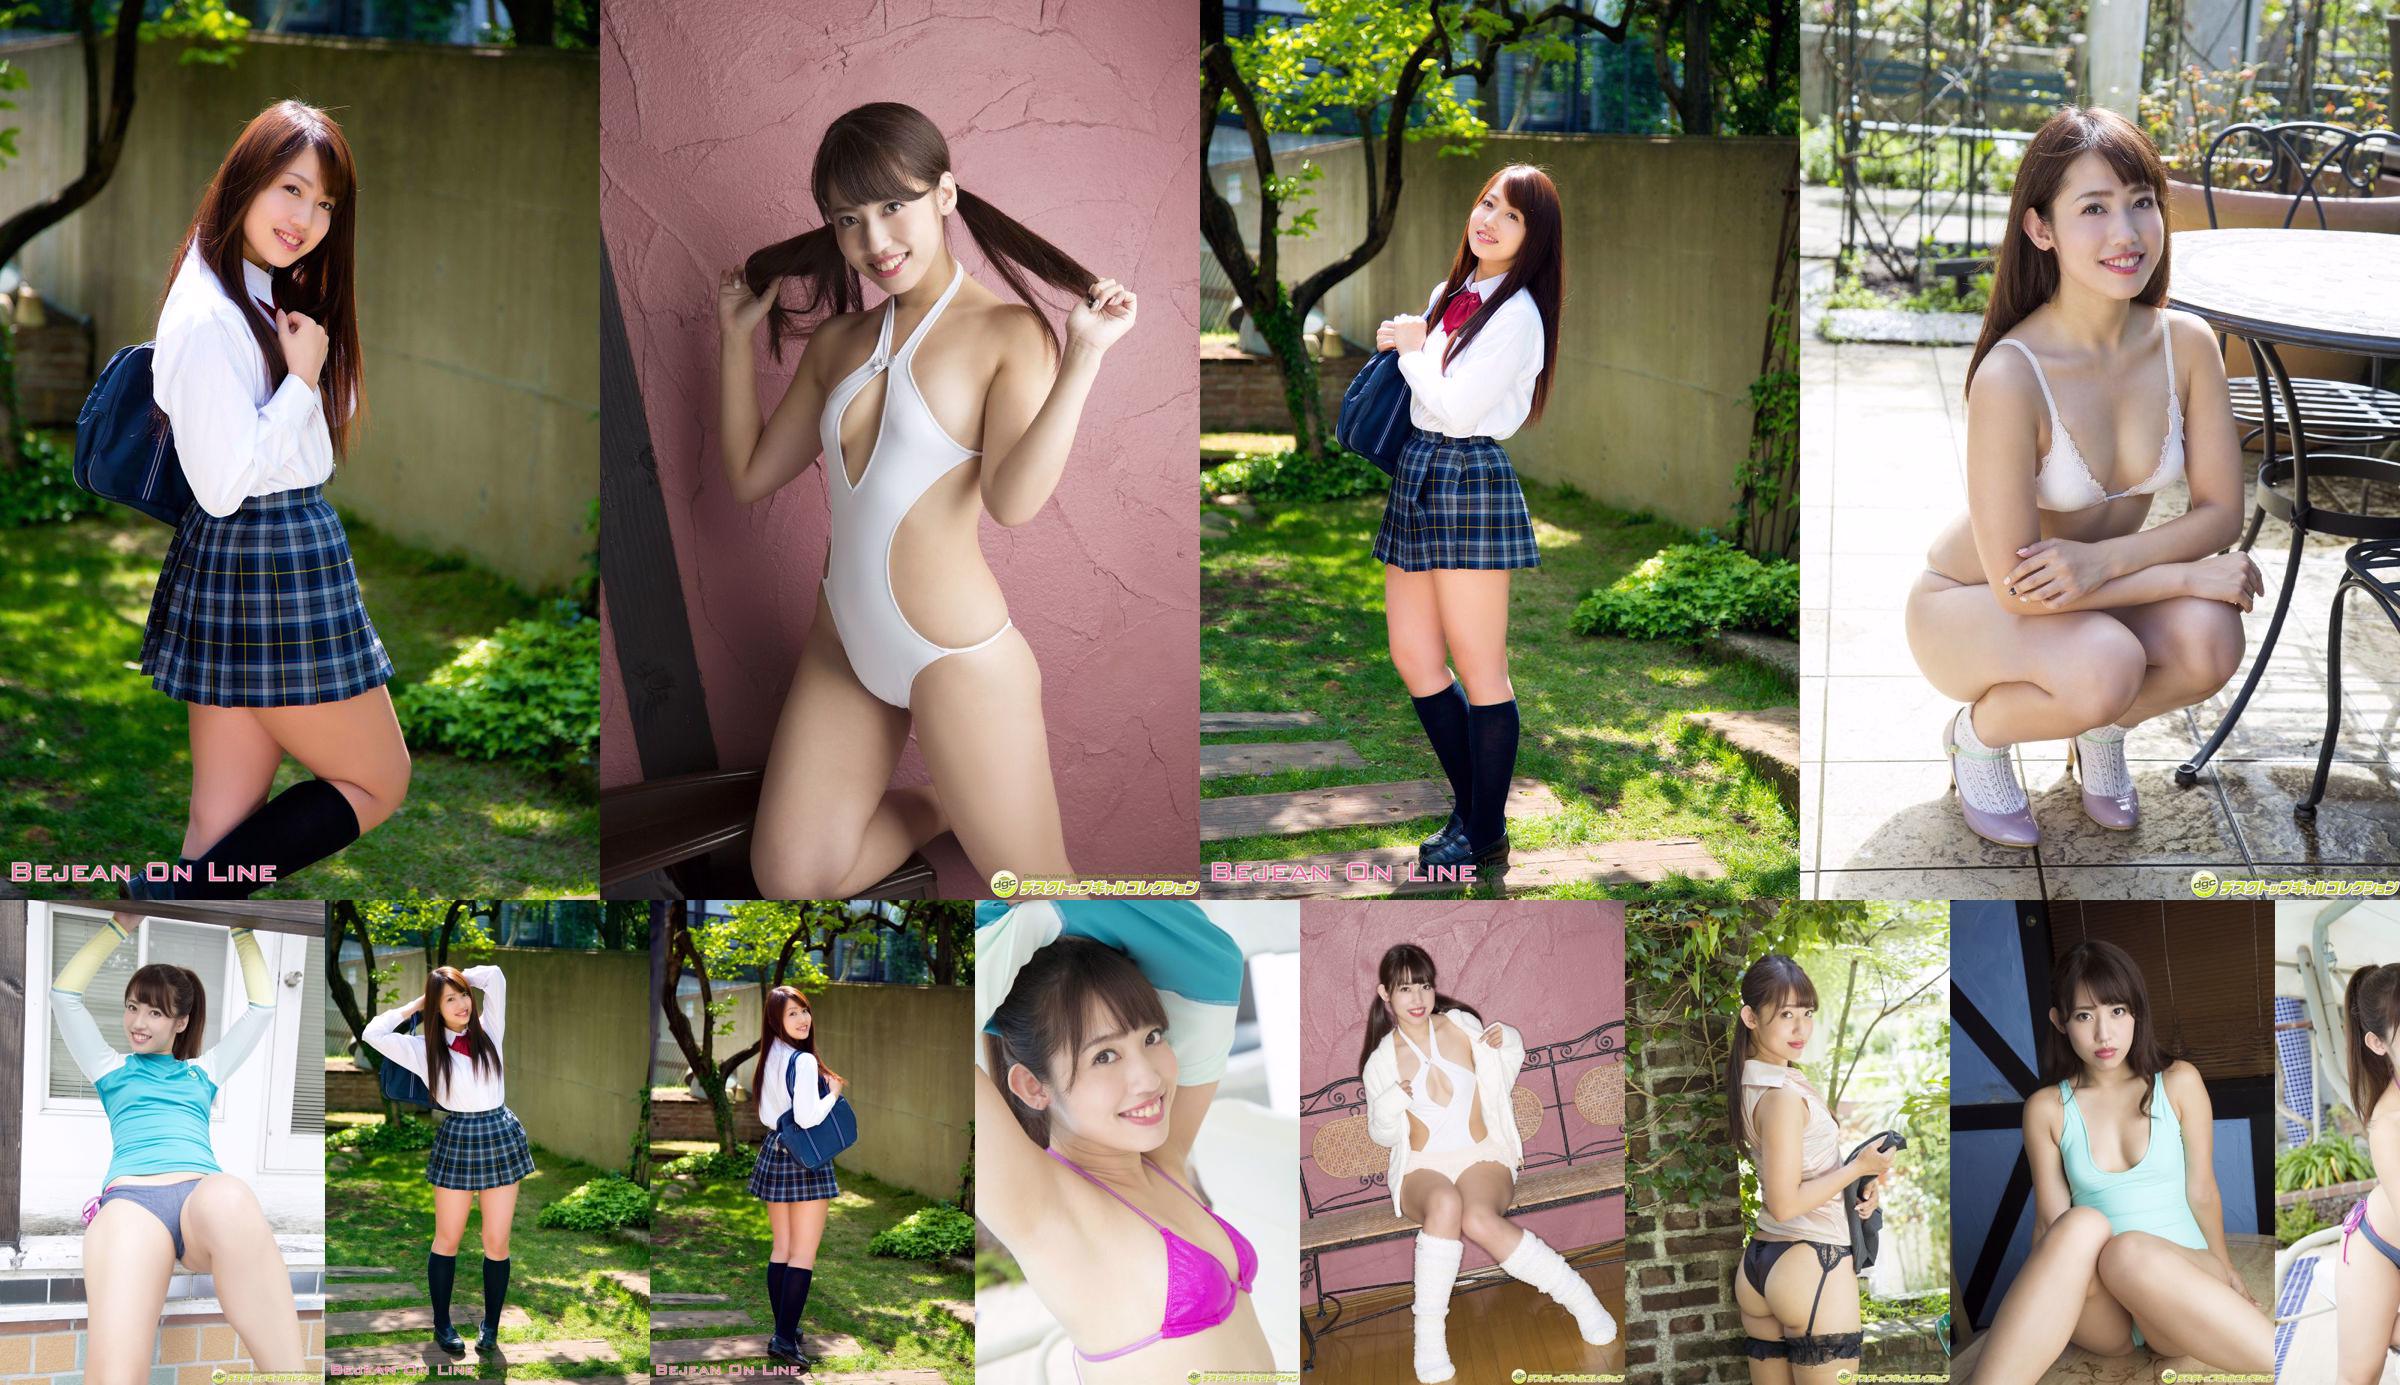 Private Bejean Girls' School Rino Rino [Bejean On Line] No.55c391 Page 22